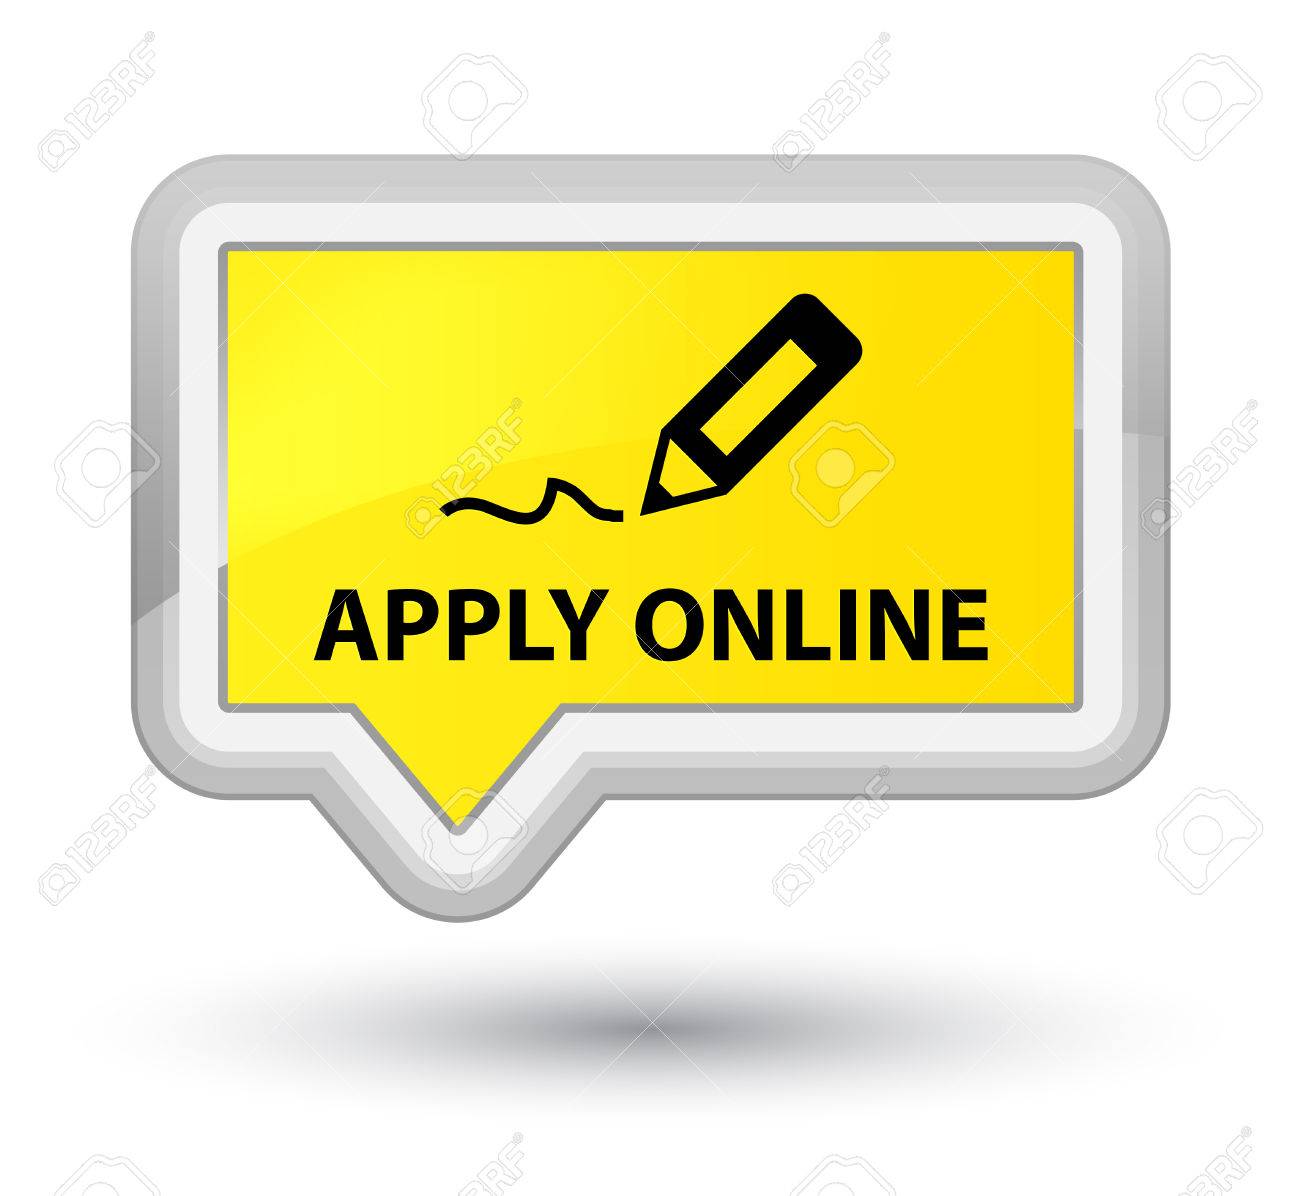 Apply Online (edit Pen Icon) Pink Square Button Stock Photo 